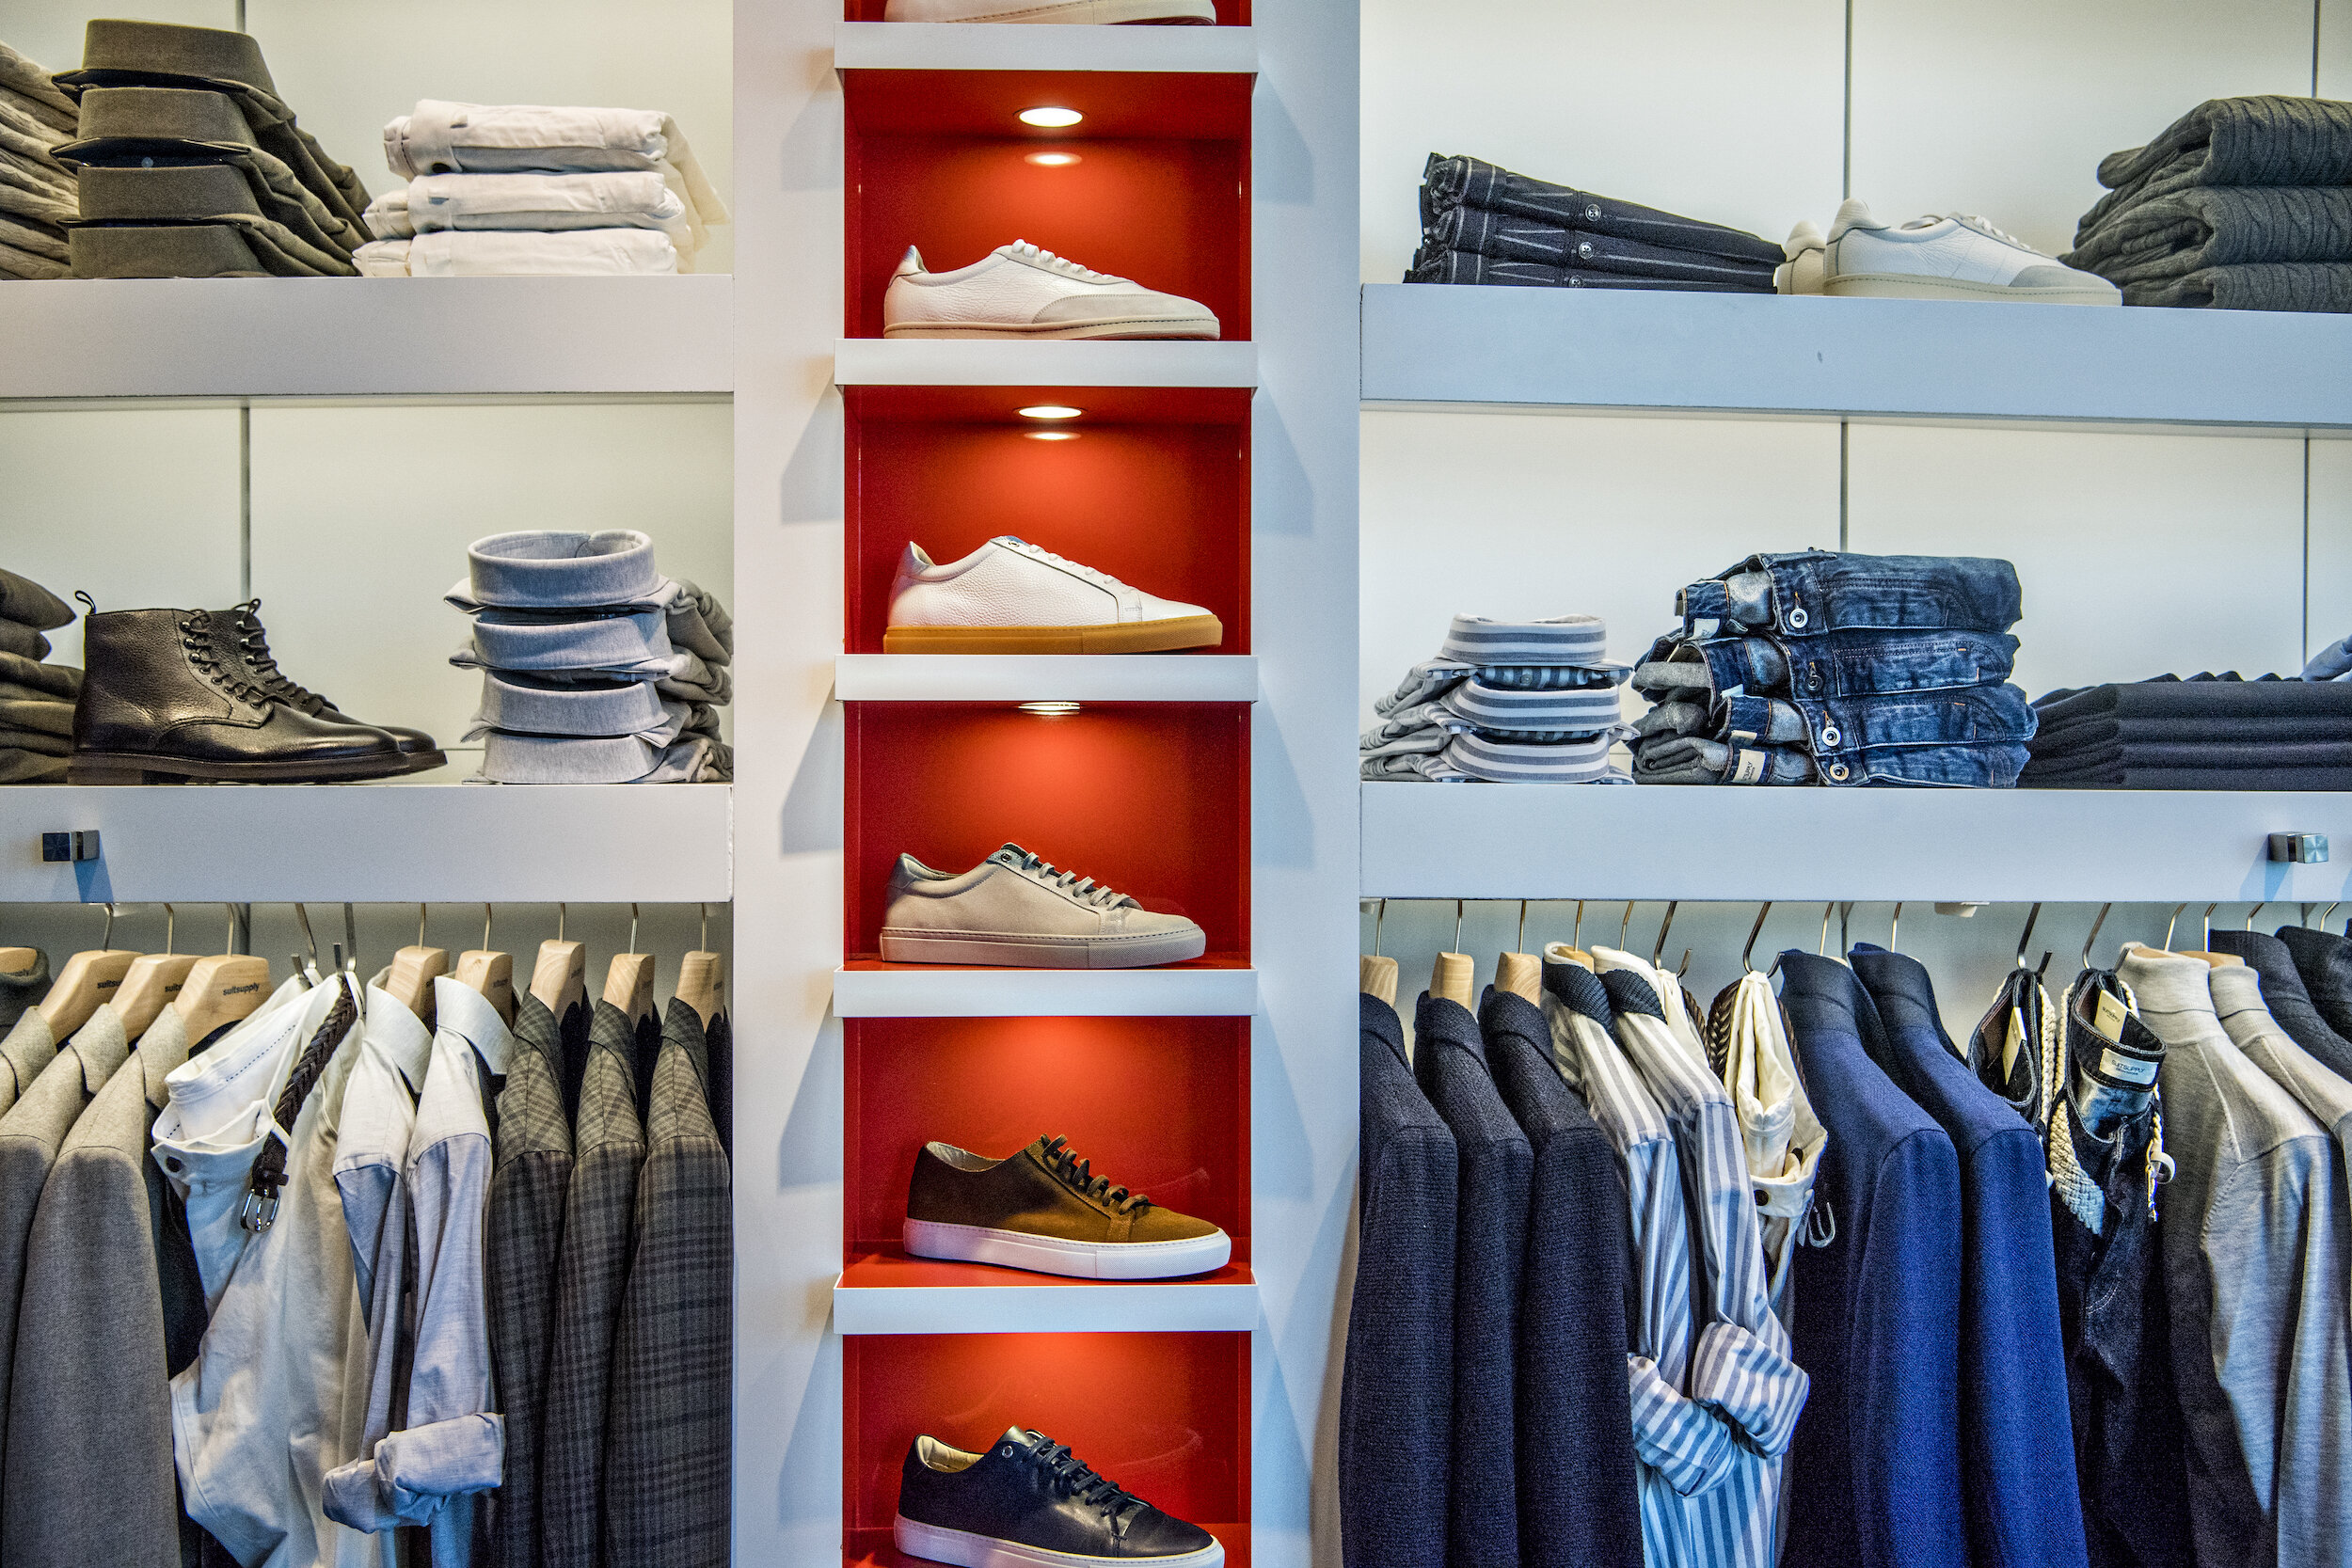 CHERRY CREEK FASHION — Your Guide To Our Top 5 Men's Boutiques in